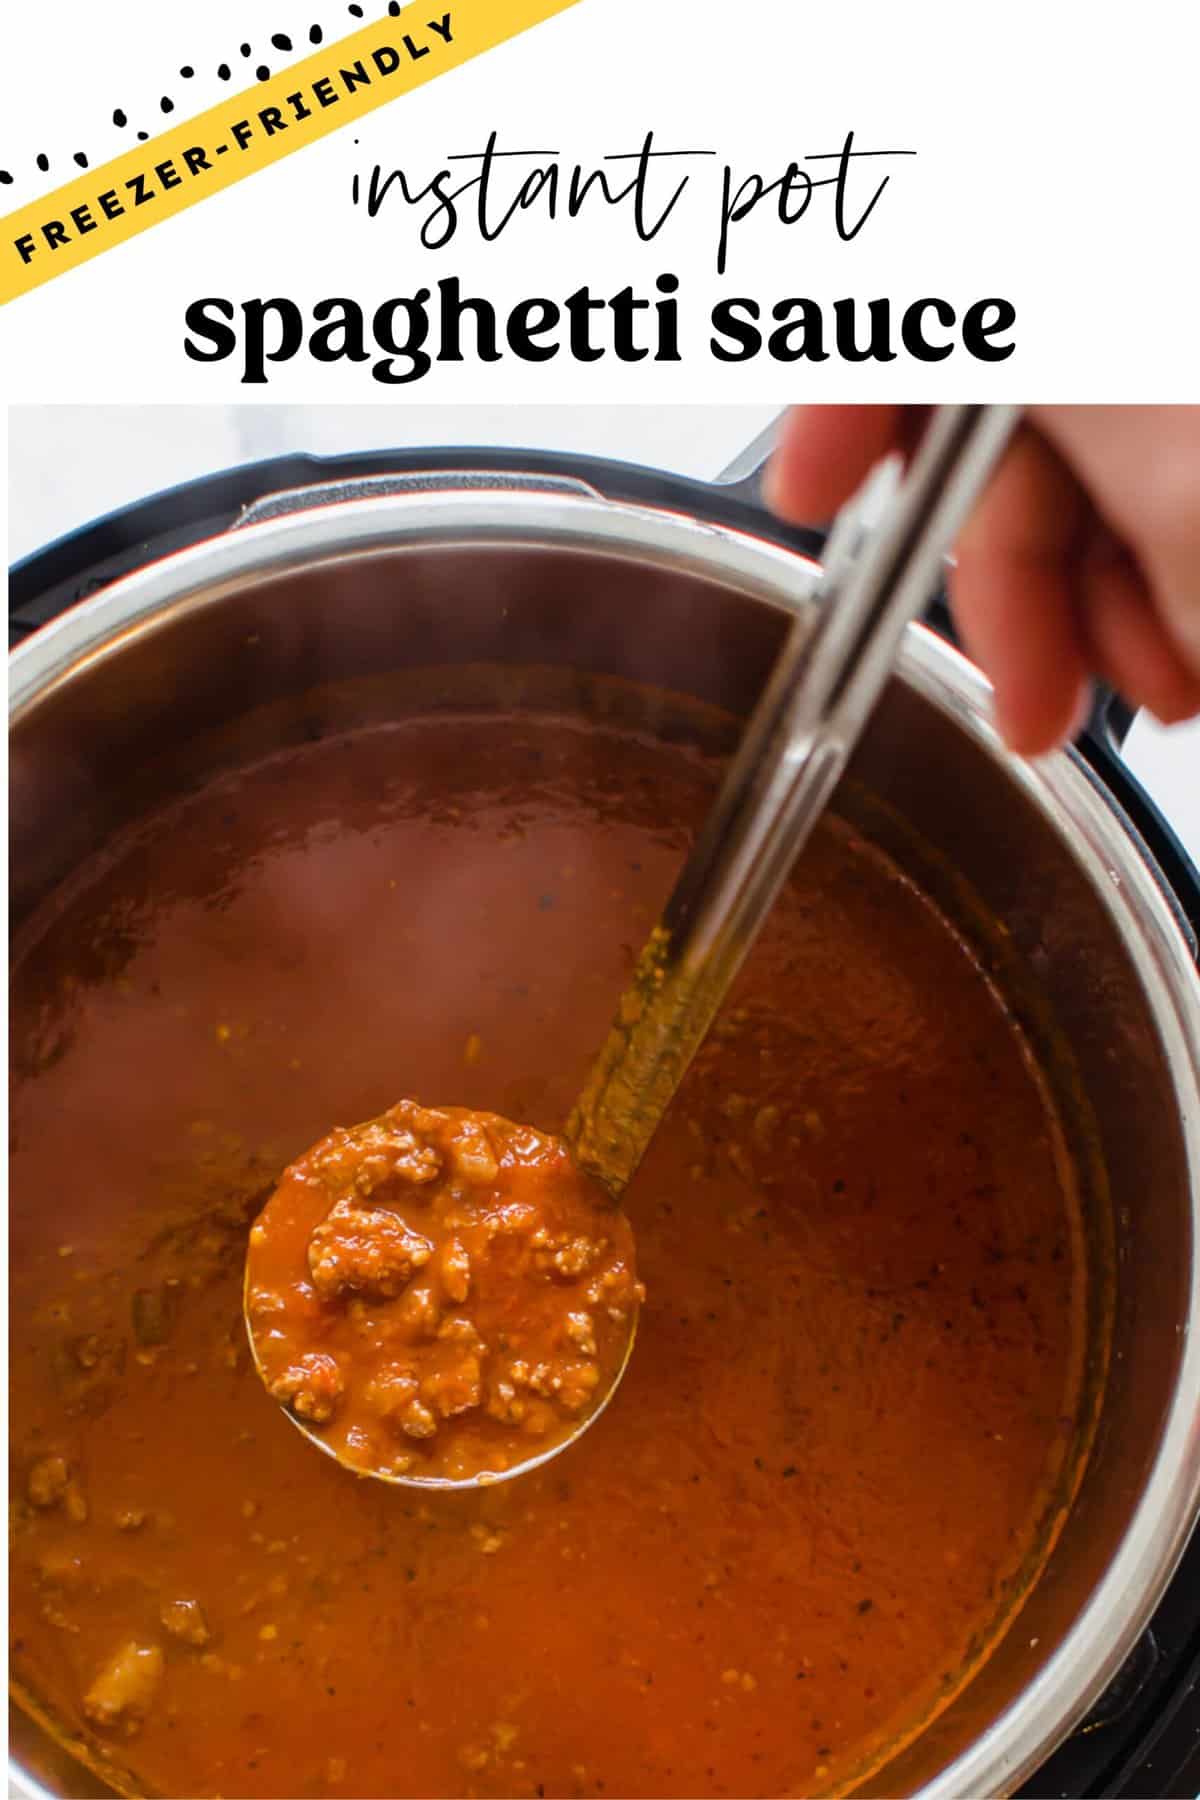 A ladle of spaghetti sauce being lifted out of an Instant Pot.